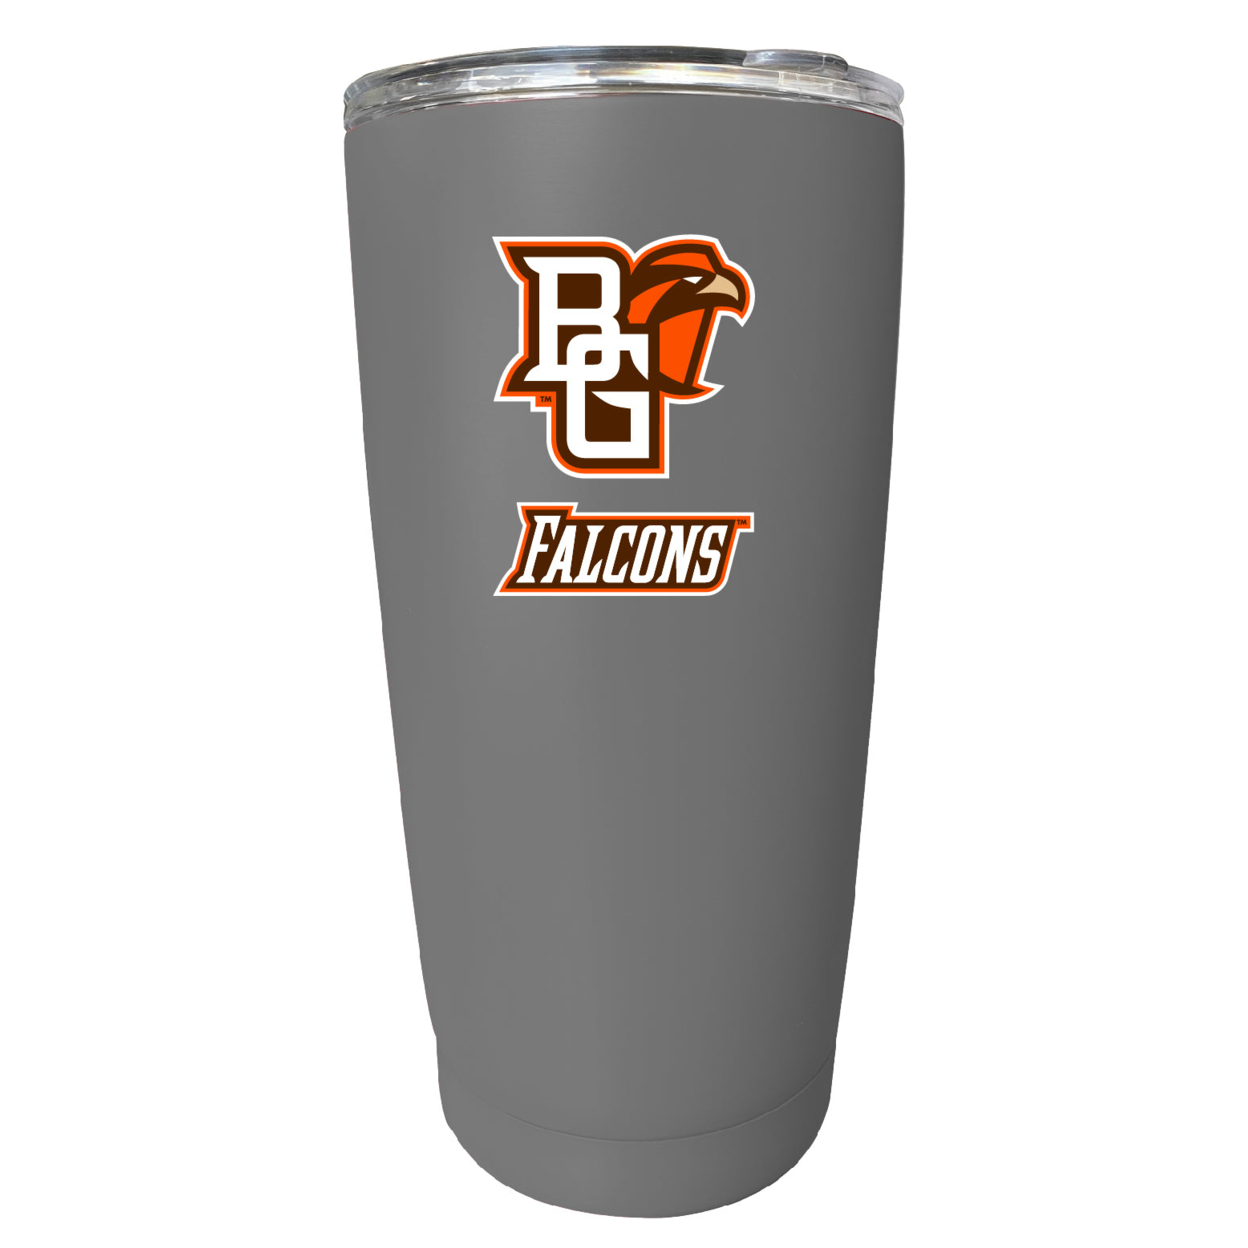 Bowling Green Falcons 16 Oz Stainless Steel Insulated Tumbler - Gray